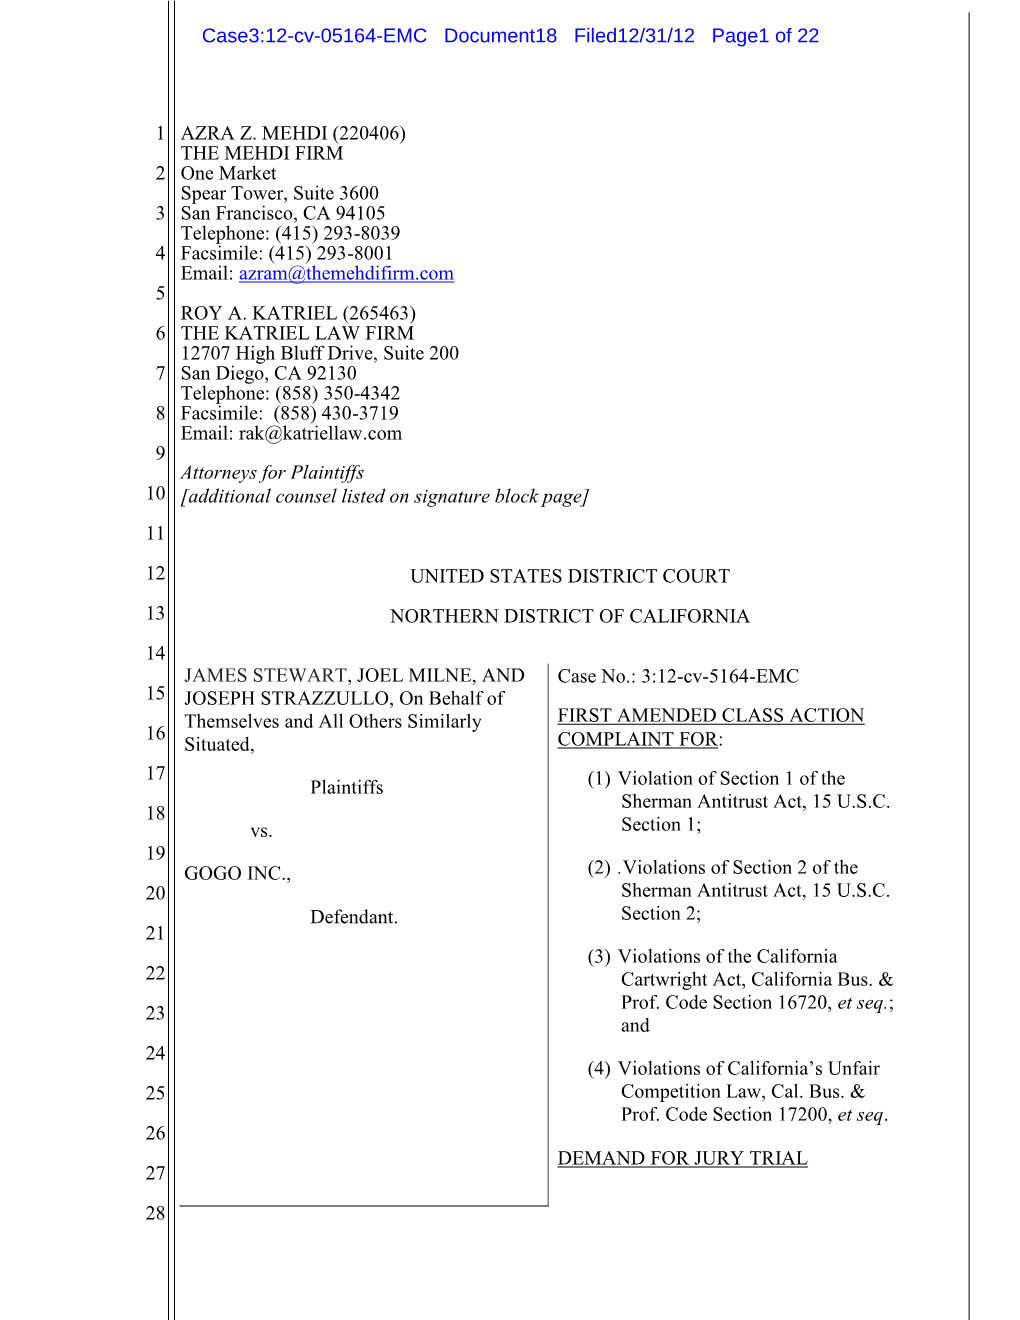 FIRST AMENDED CLASS ACTION COMPLAINT Case3:12-Cv-05164-EMC Document18 Filed12/31/12 Page3 of 22